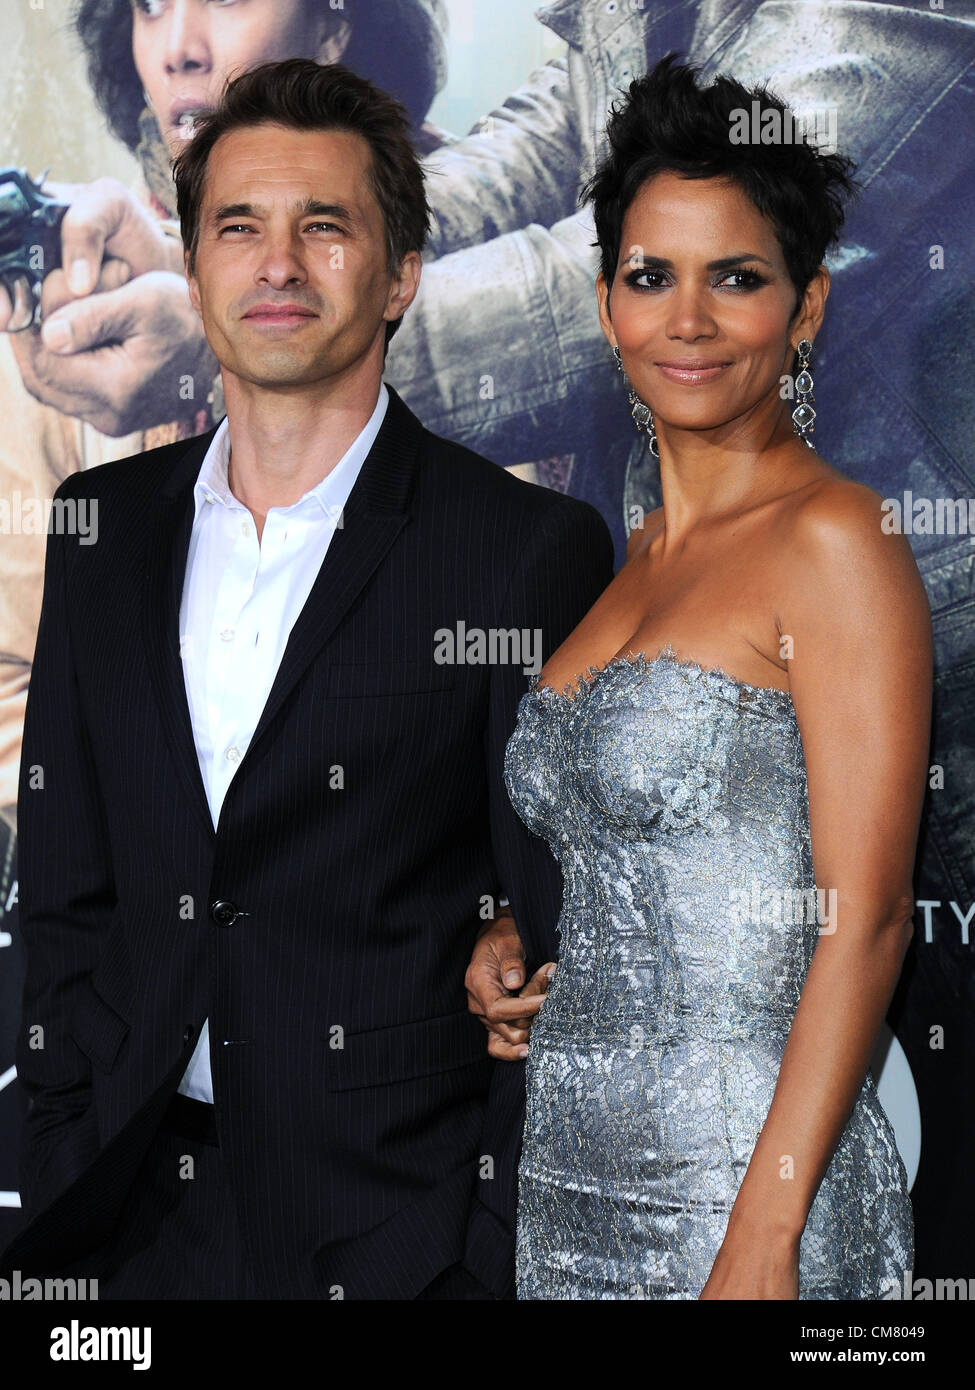 Los Angeles, USA. 24th October 2012. Halle Berry and Olivier Martinez arriving at the film premiere of 'Cloud Atlas' in Los Angeles on October 24th 2012 Stock Photo